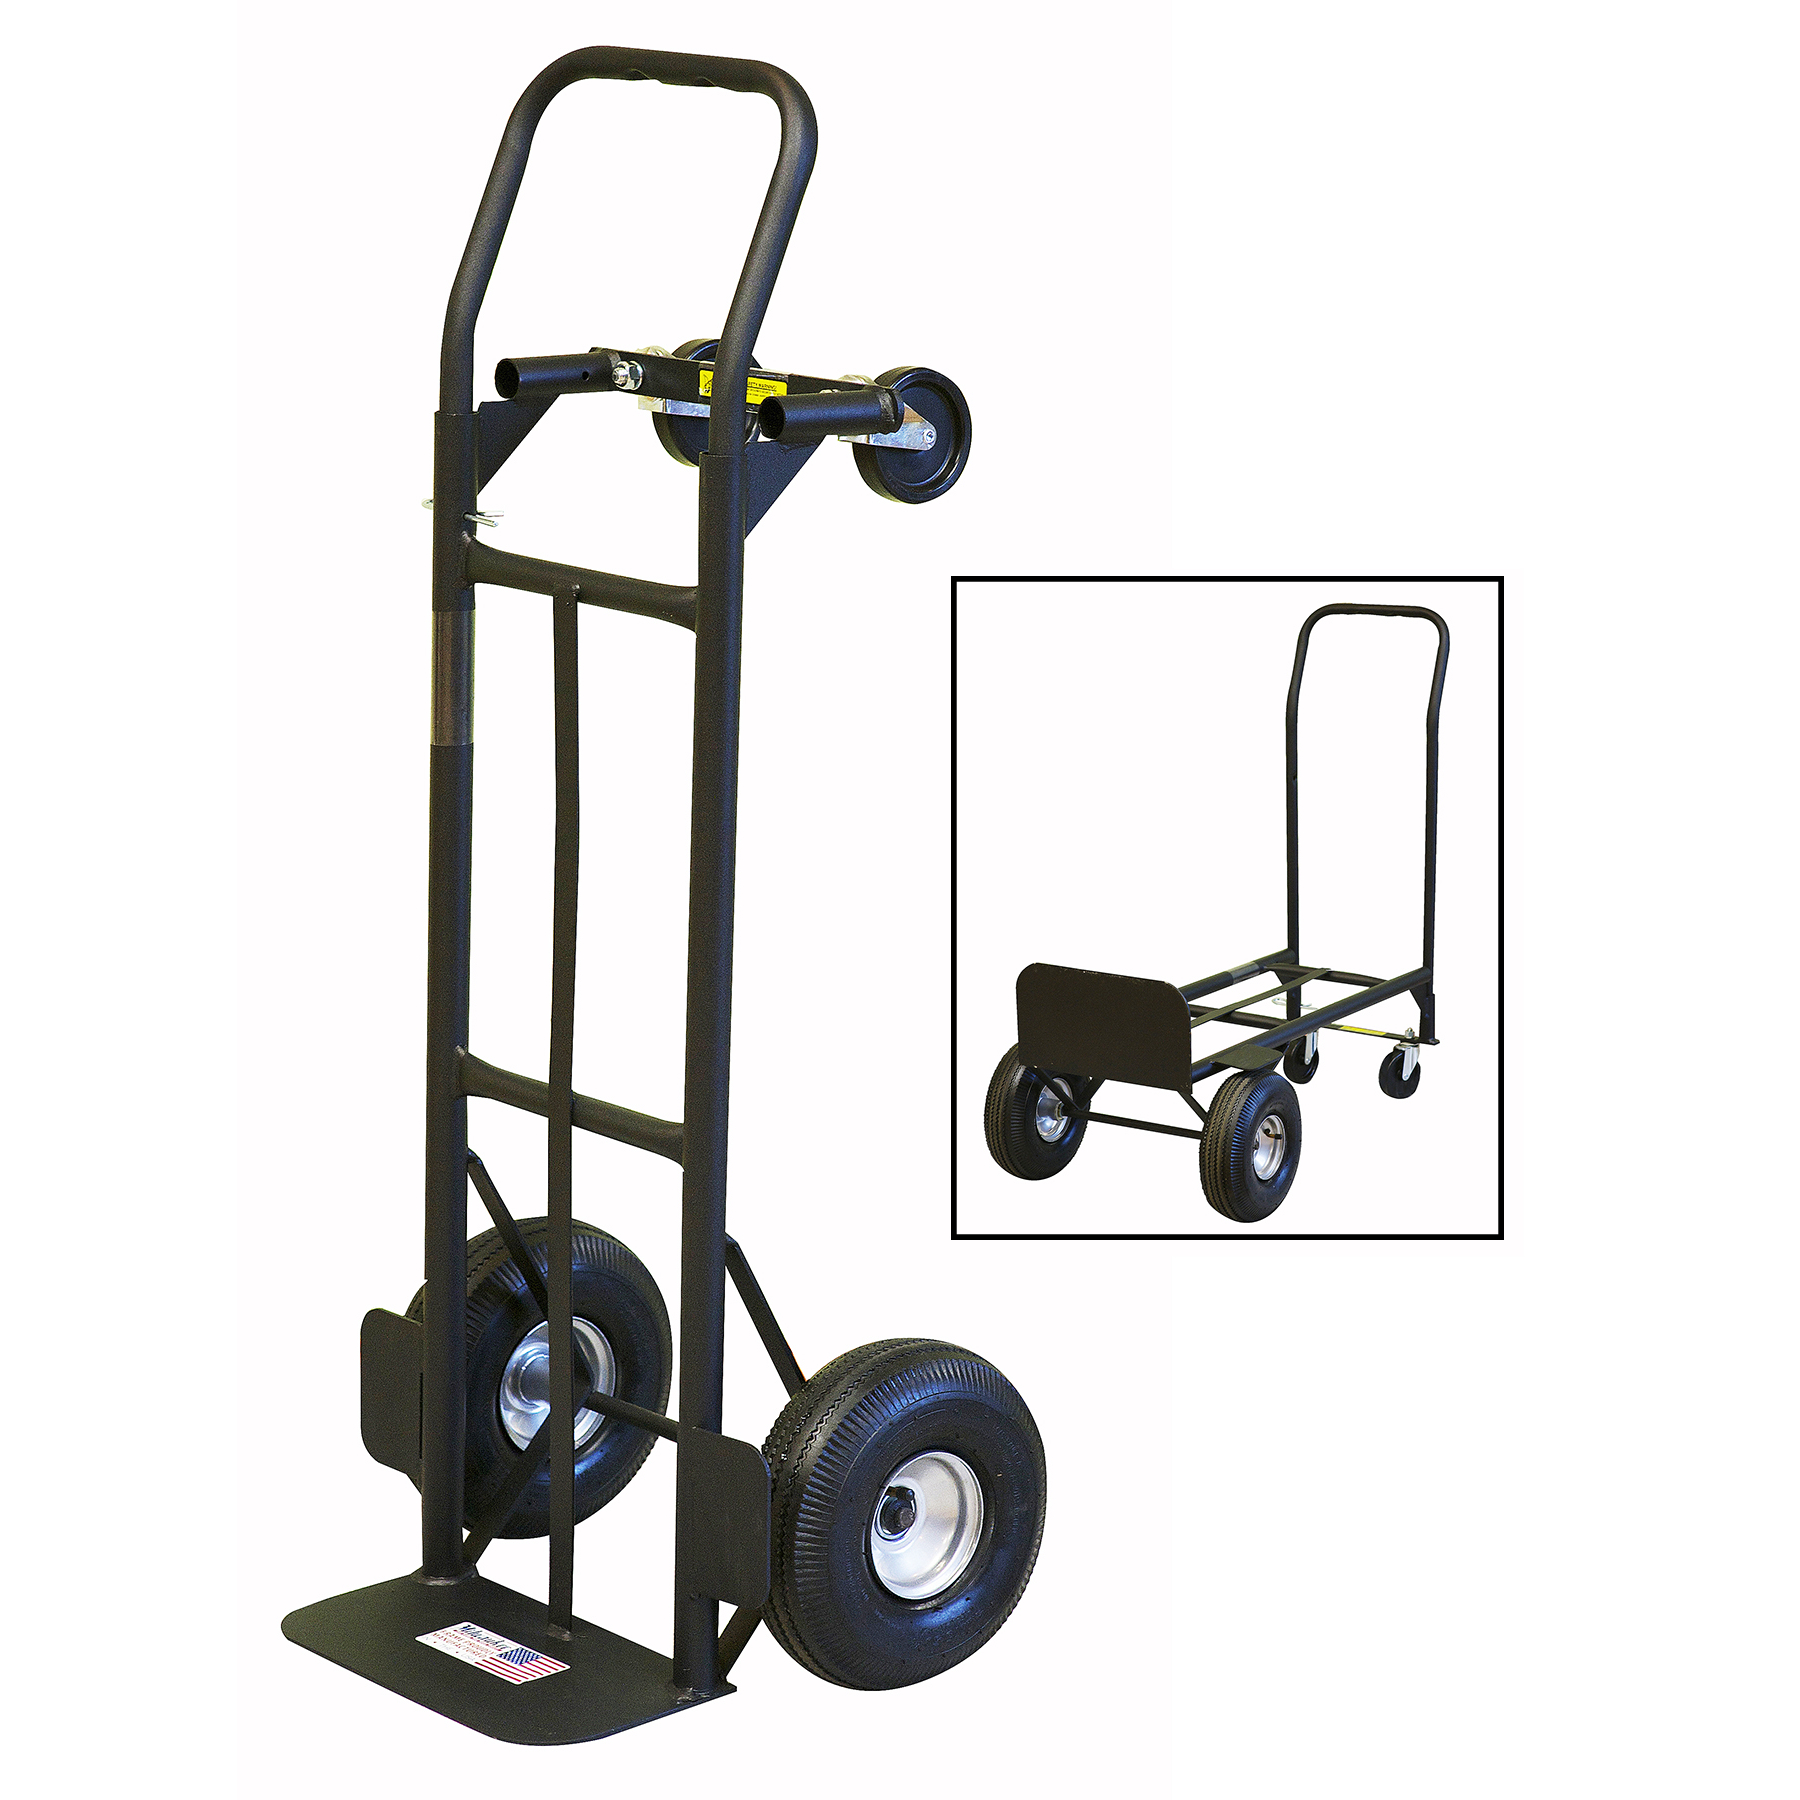 Milwaukee 800 lb. Capacity 2-in-1 Convertible Hand Truck W/10" Pneumatic Tires - image 1 of 4